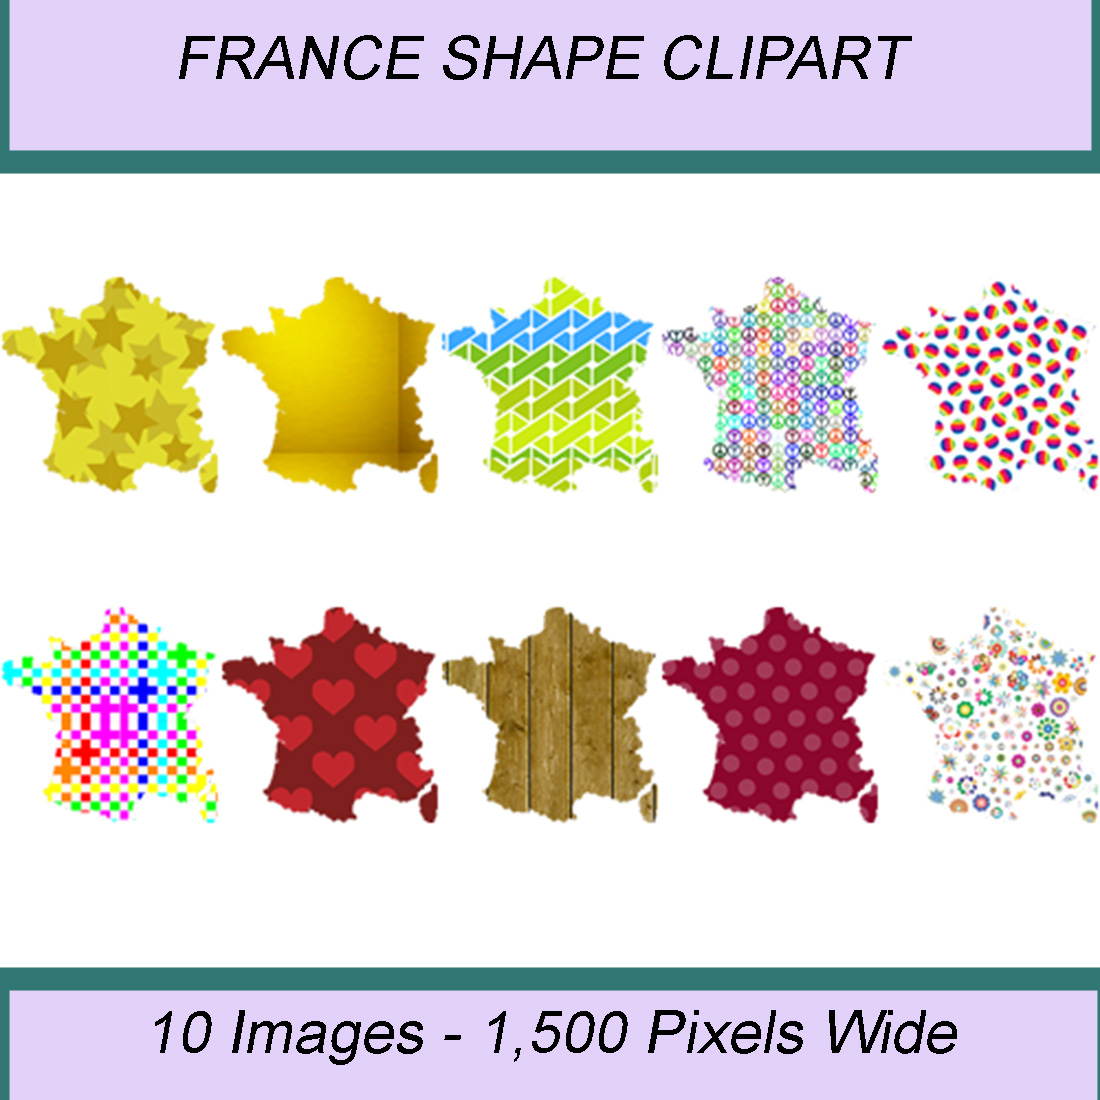 FRANCE SHAPE CLIPART ICONS cover image.